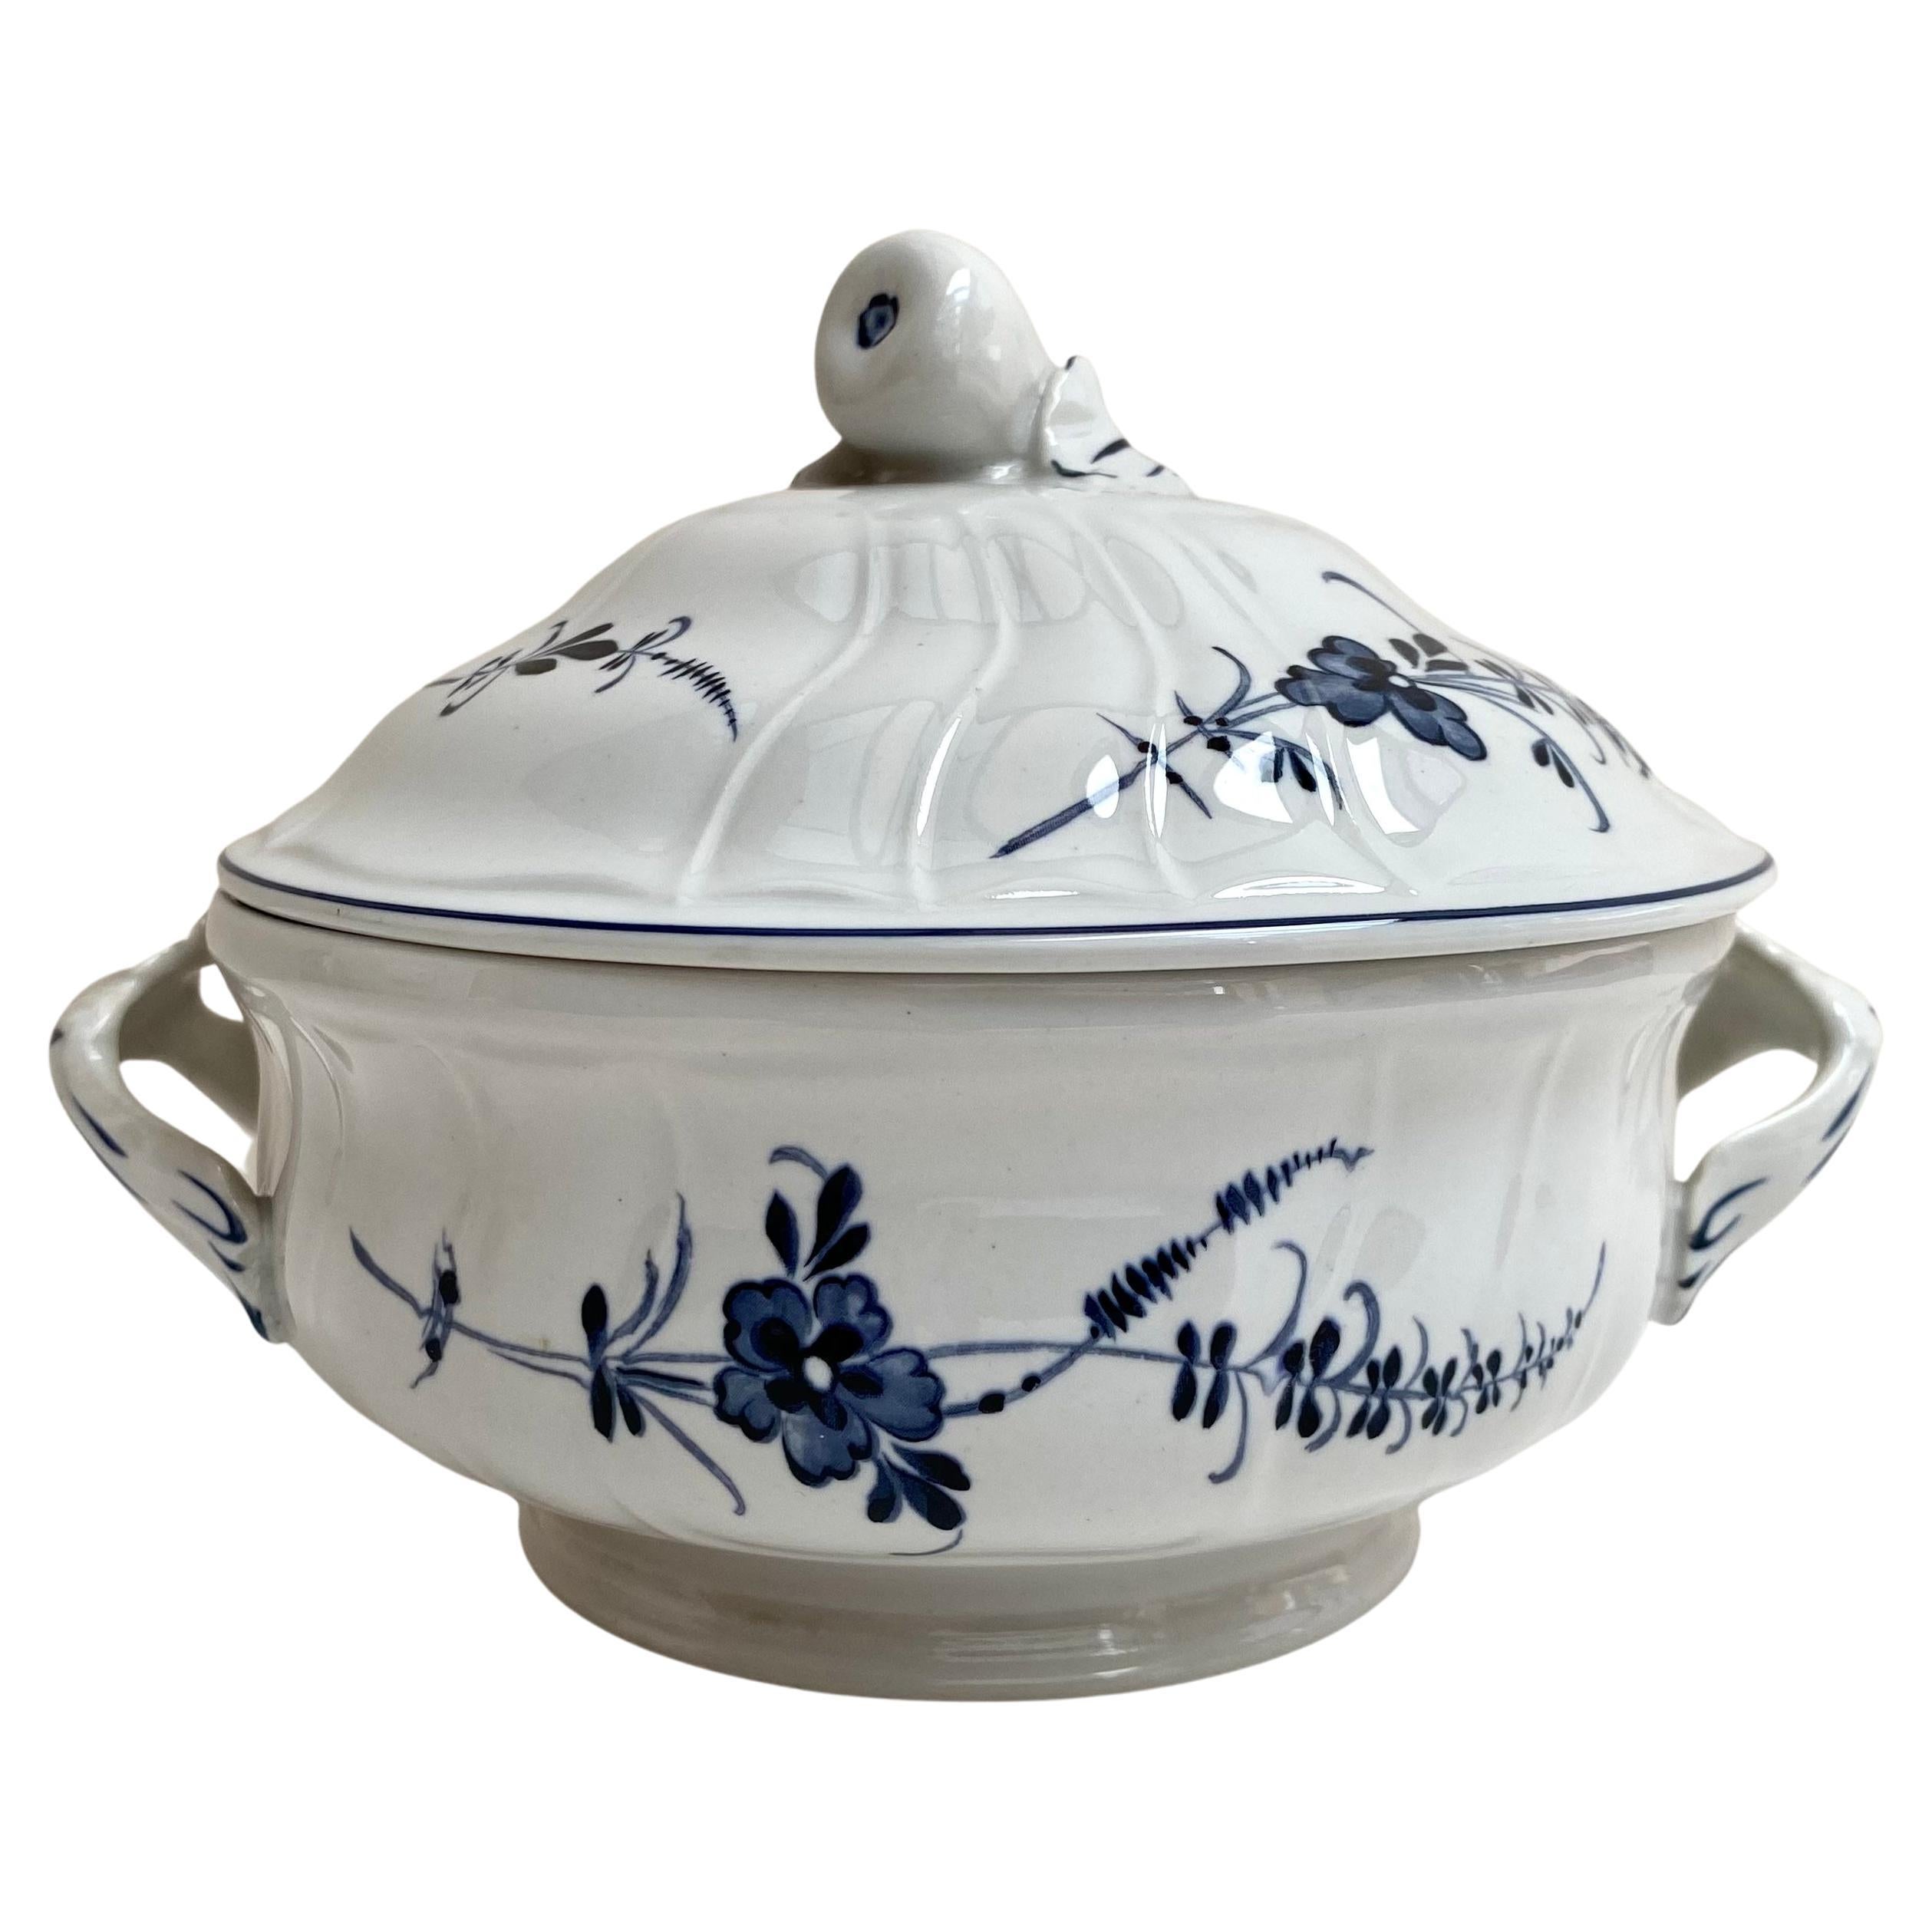 Villeroy & Boch Vieux Luxembourg 'Old Luxembourg' Candy Tureen with Lid